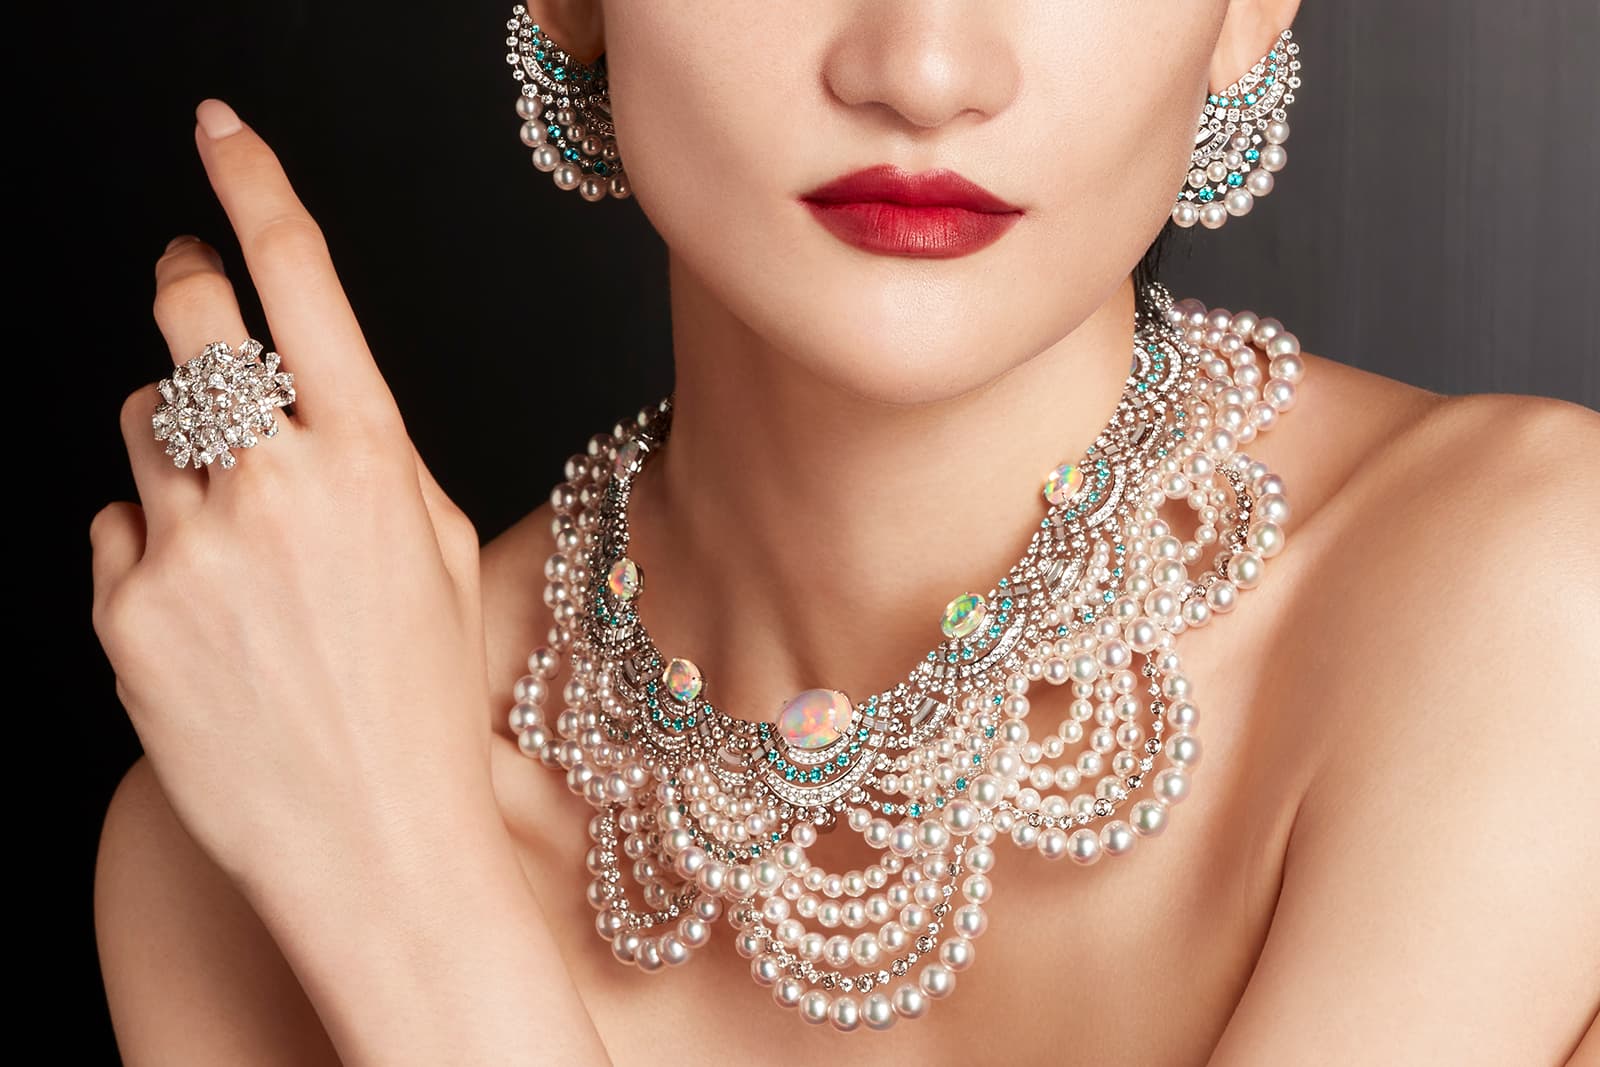 Mikimoto 'The Japanese Sense of Beauty' High Jewellery Collection necklace and matching earrings in 18k white gold with Akoya cultured pearls, opals, tourmaline, mother of pearl and diamonds